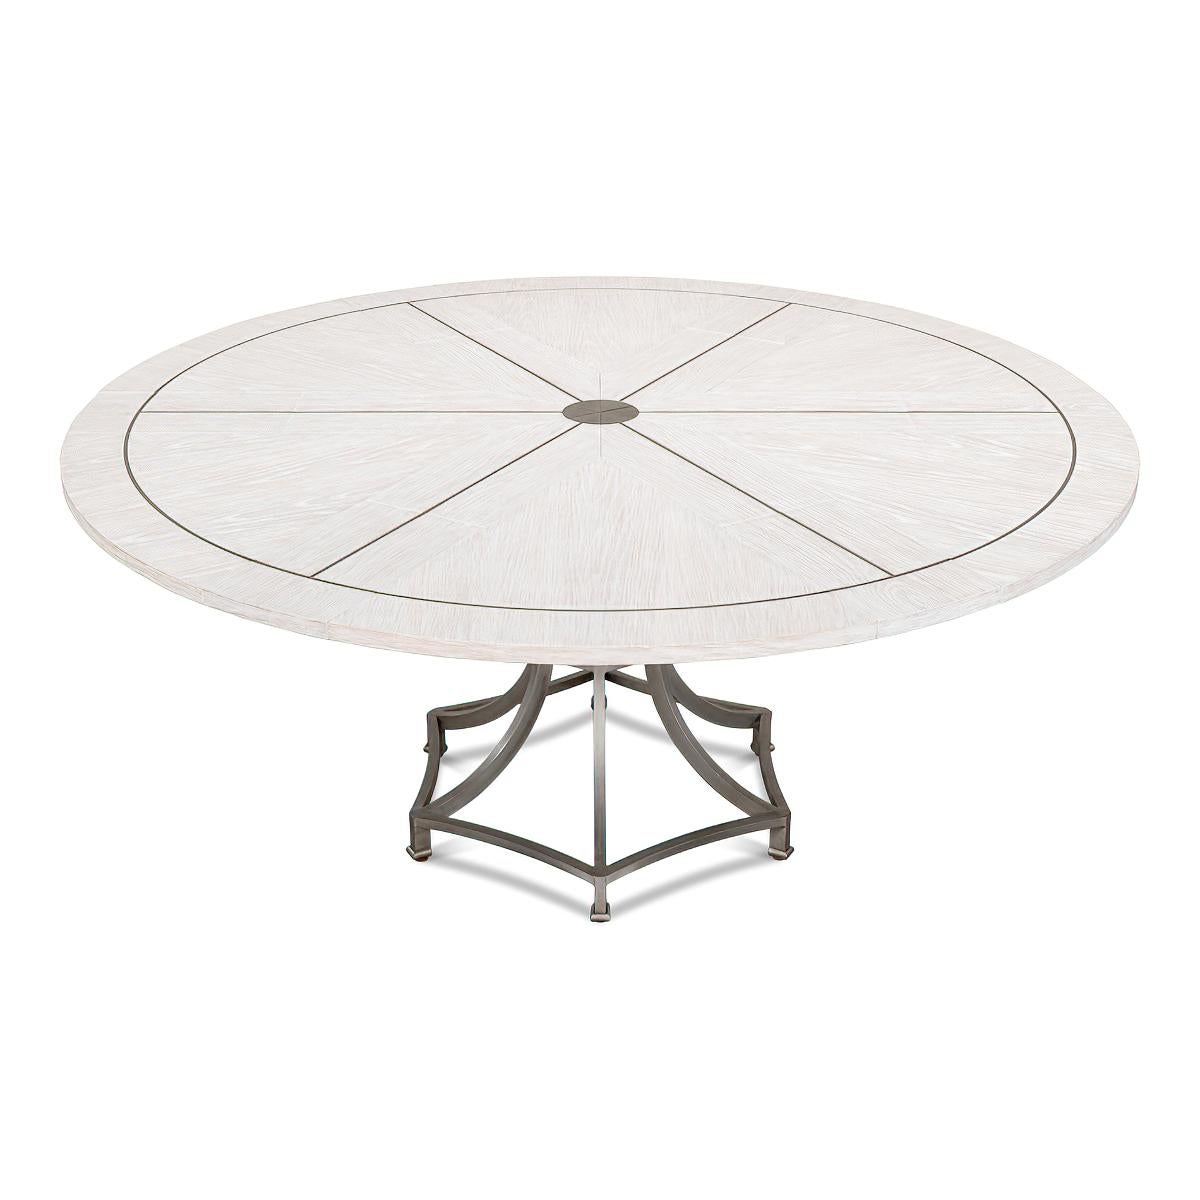 Metal Modern Industrial Round Dining Table, White Wash